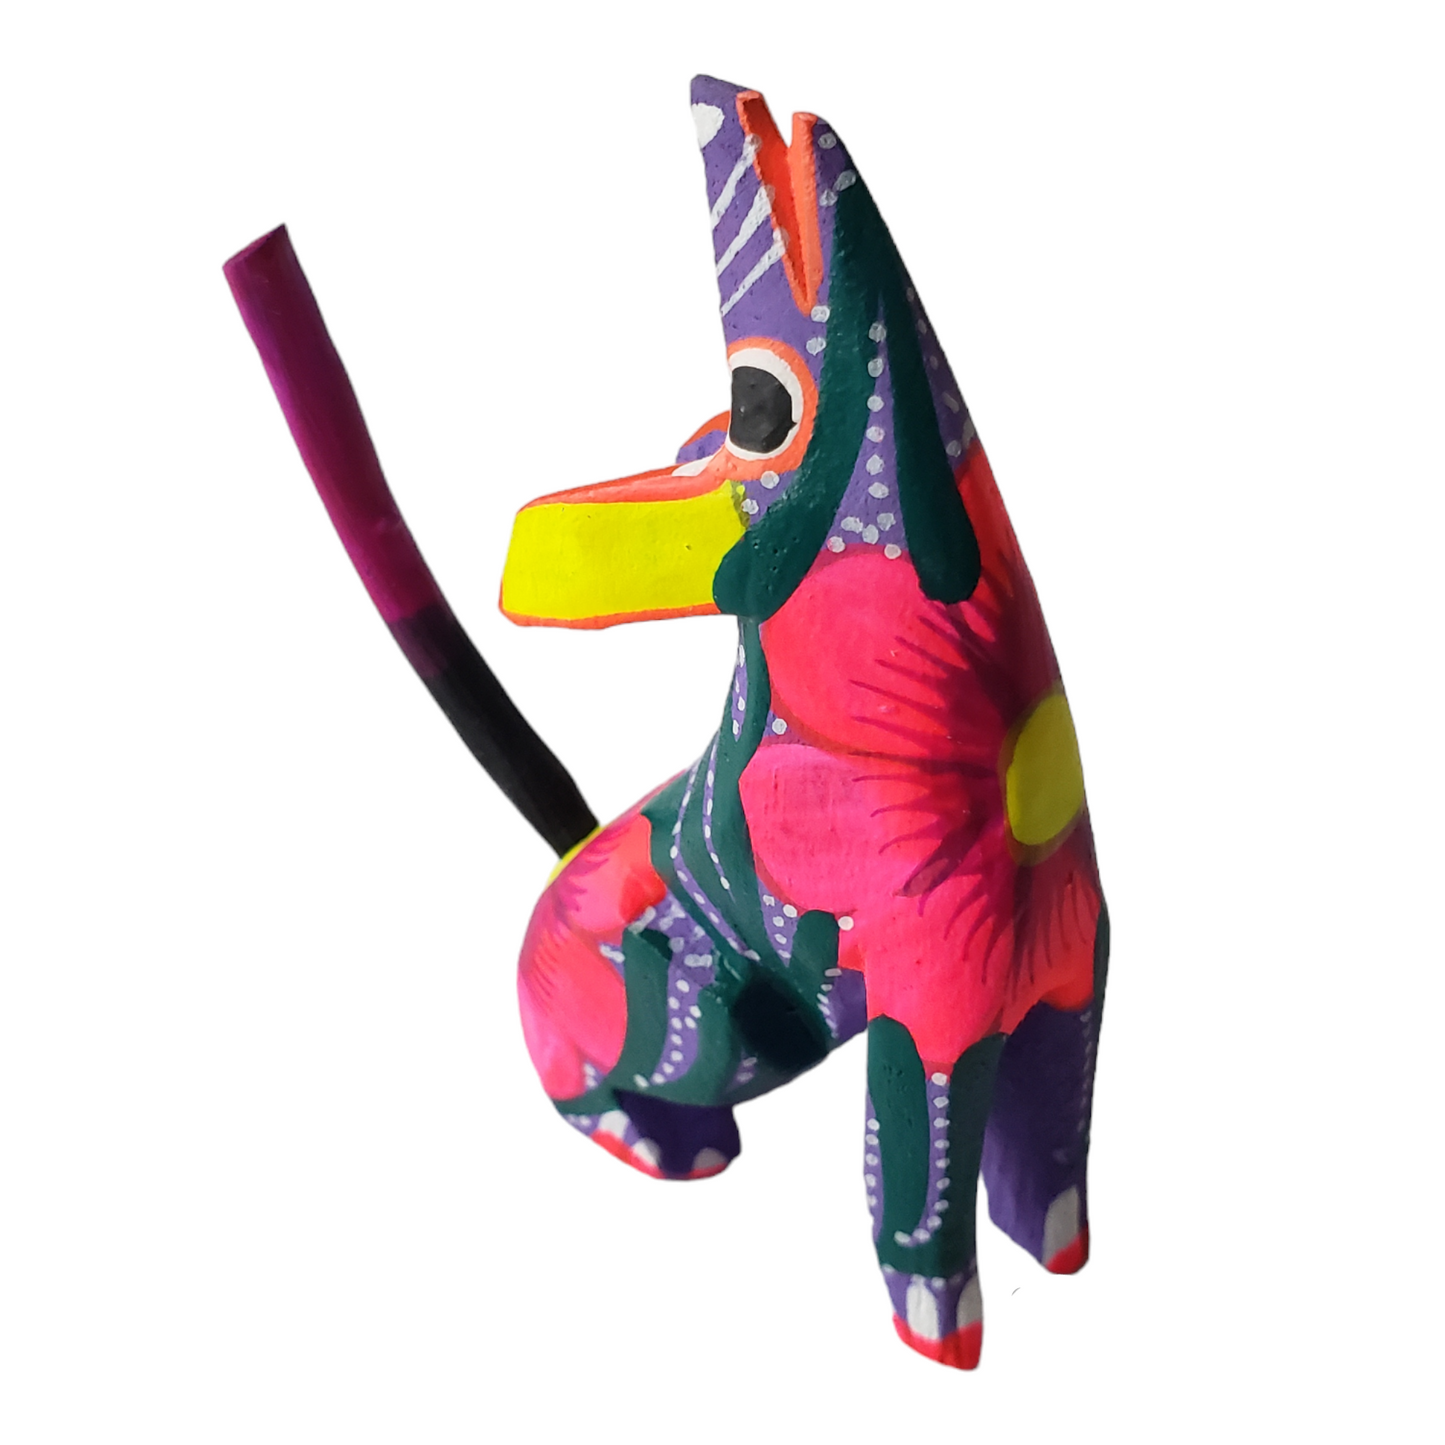 Oaxacan Alebrije Coyote Mini Wood Carving Mexican Hand Painted